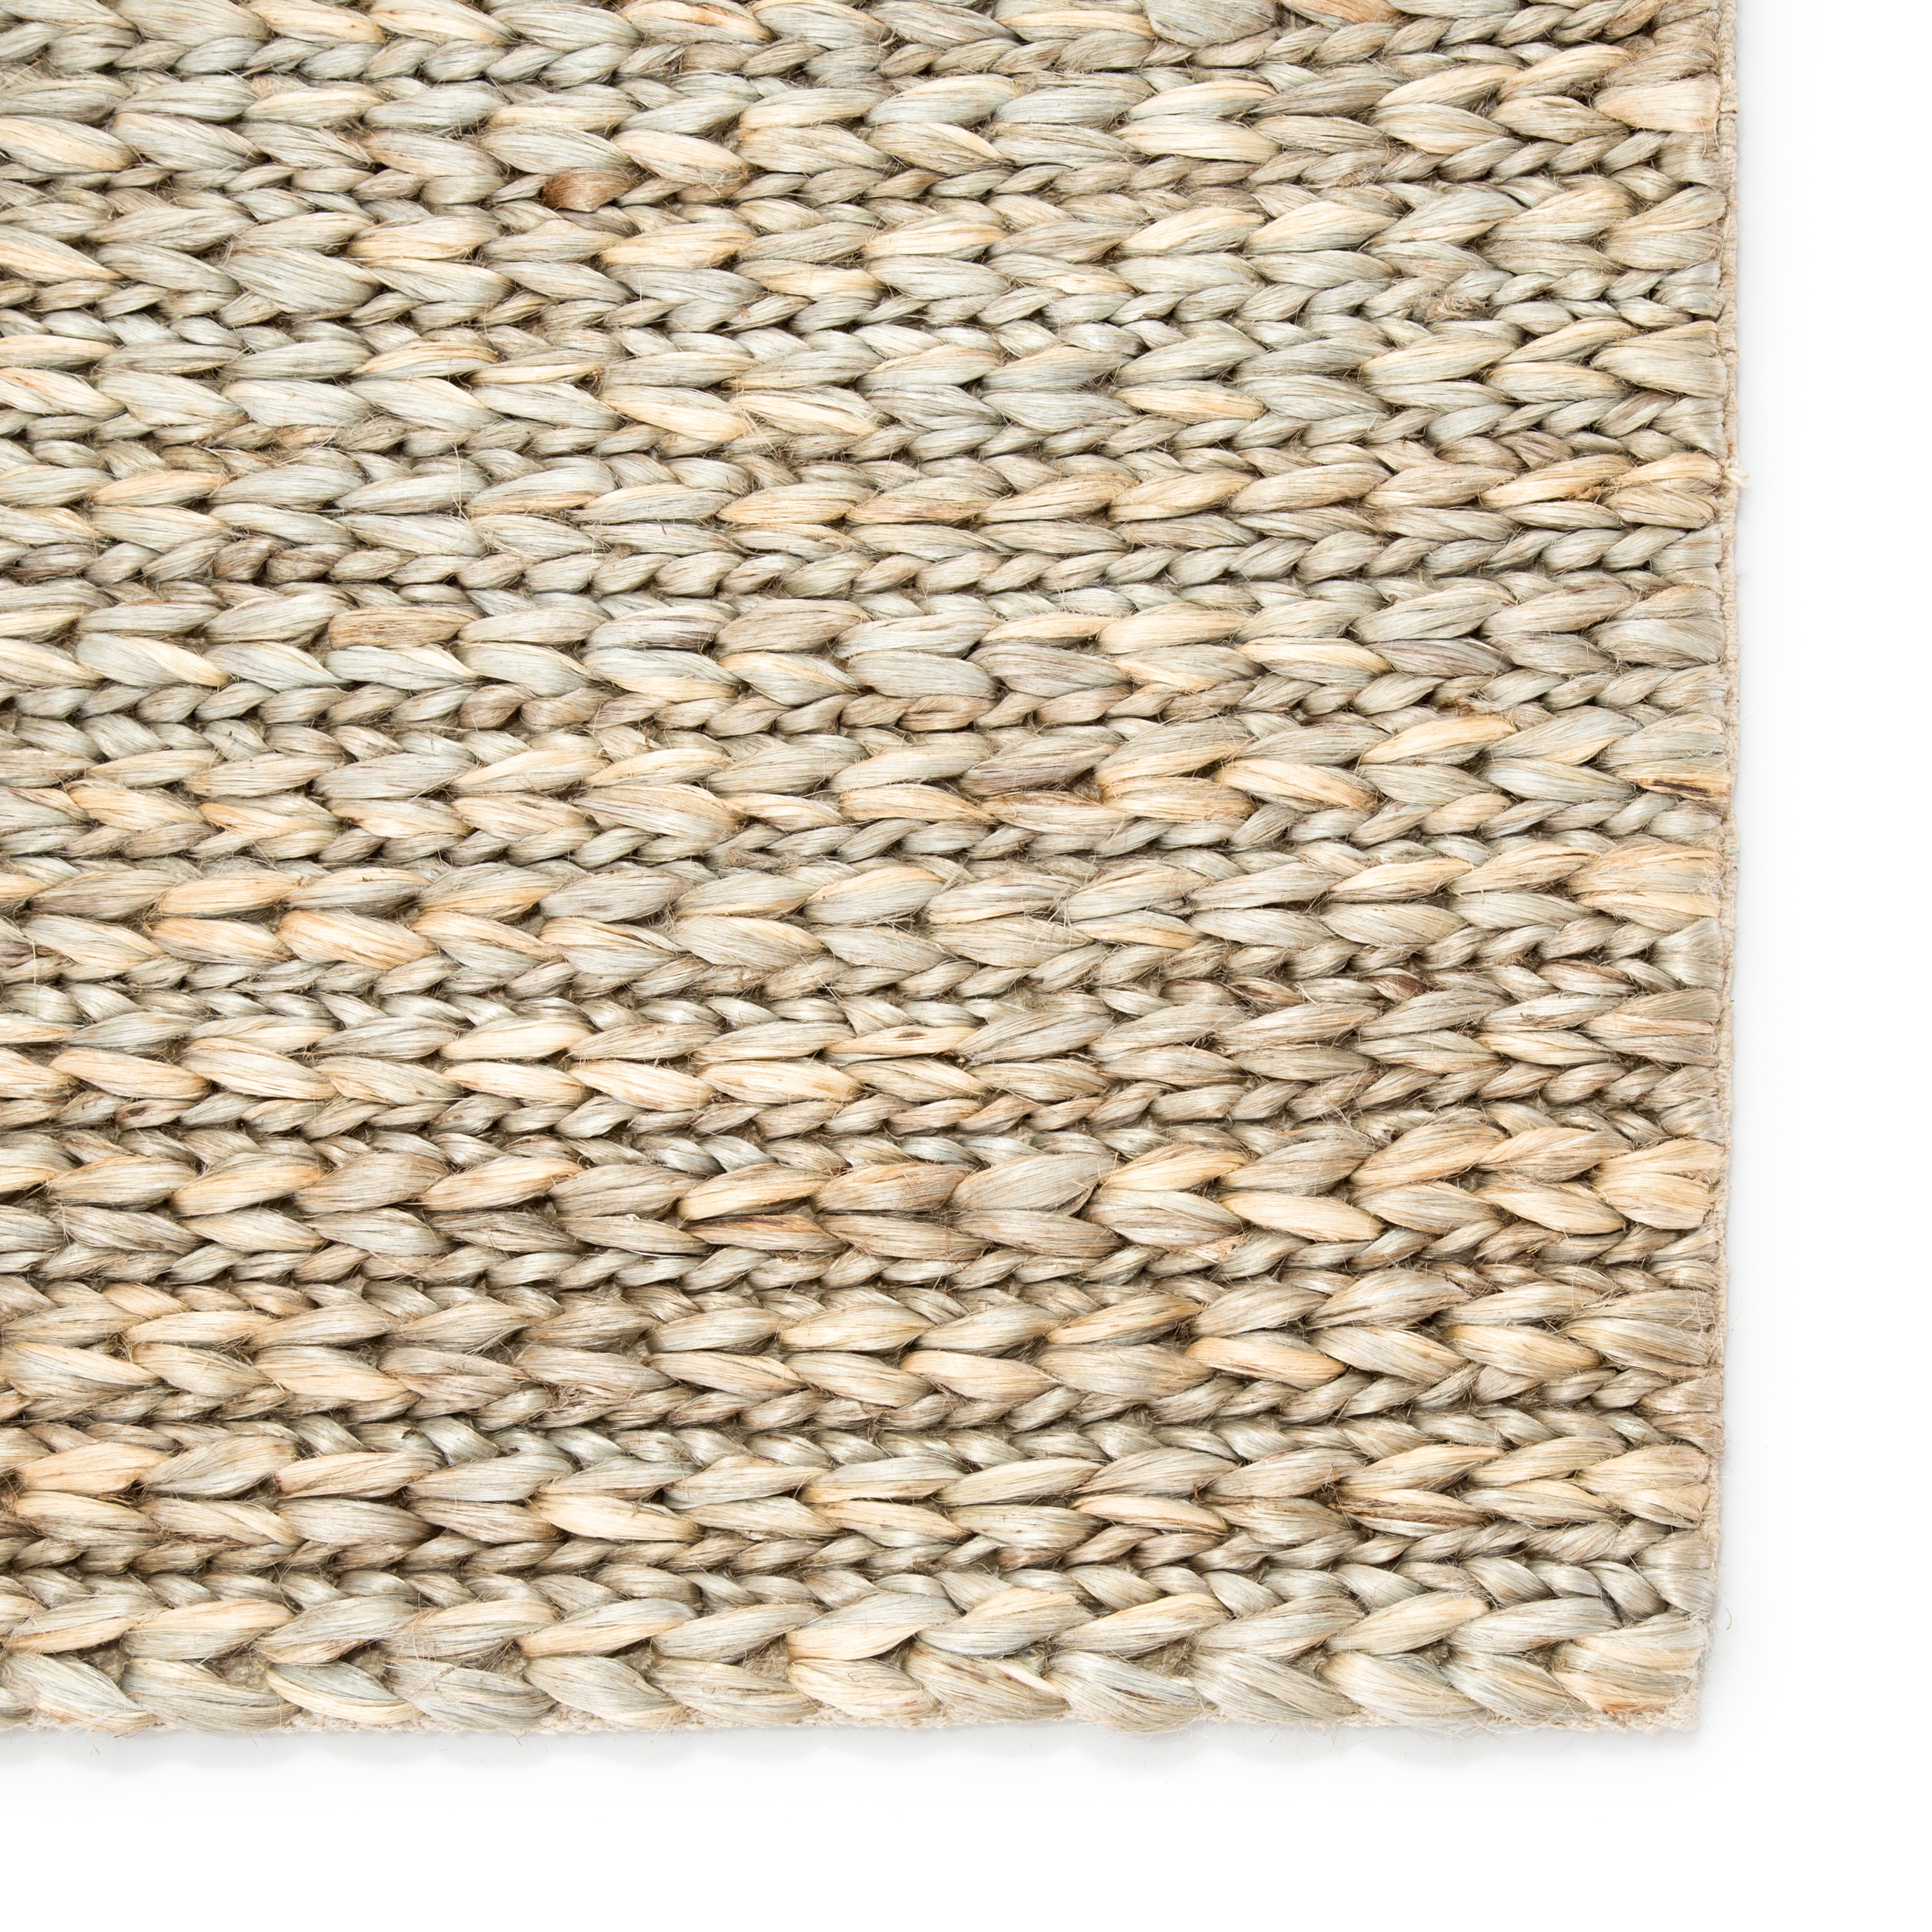 Calista Natural Solid Tan/ Greige Area Rug (9'X12') - Image 3